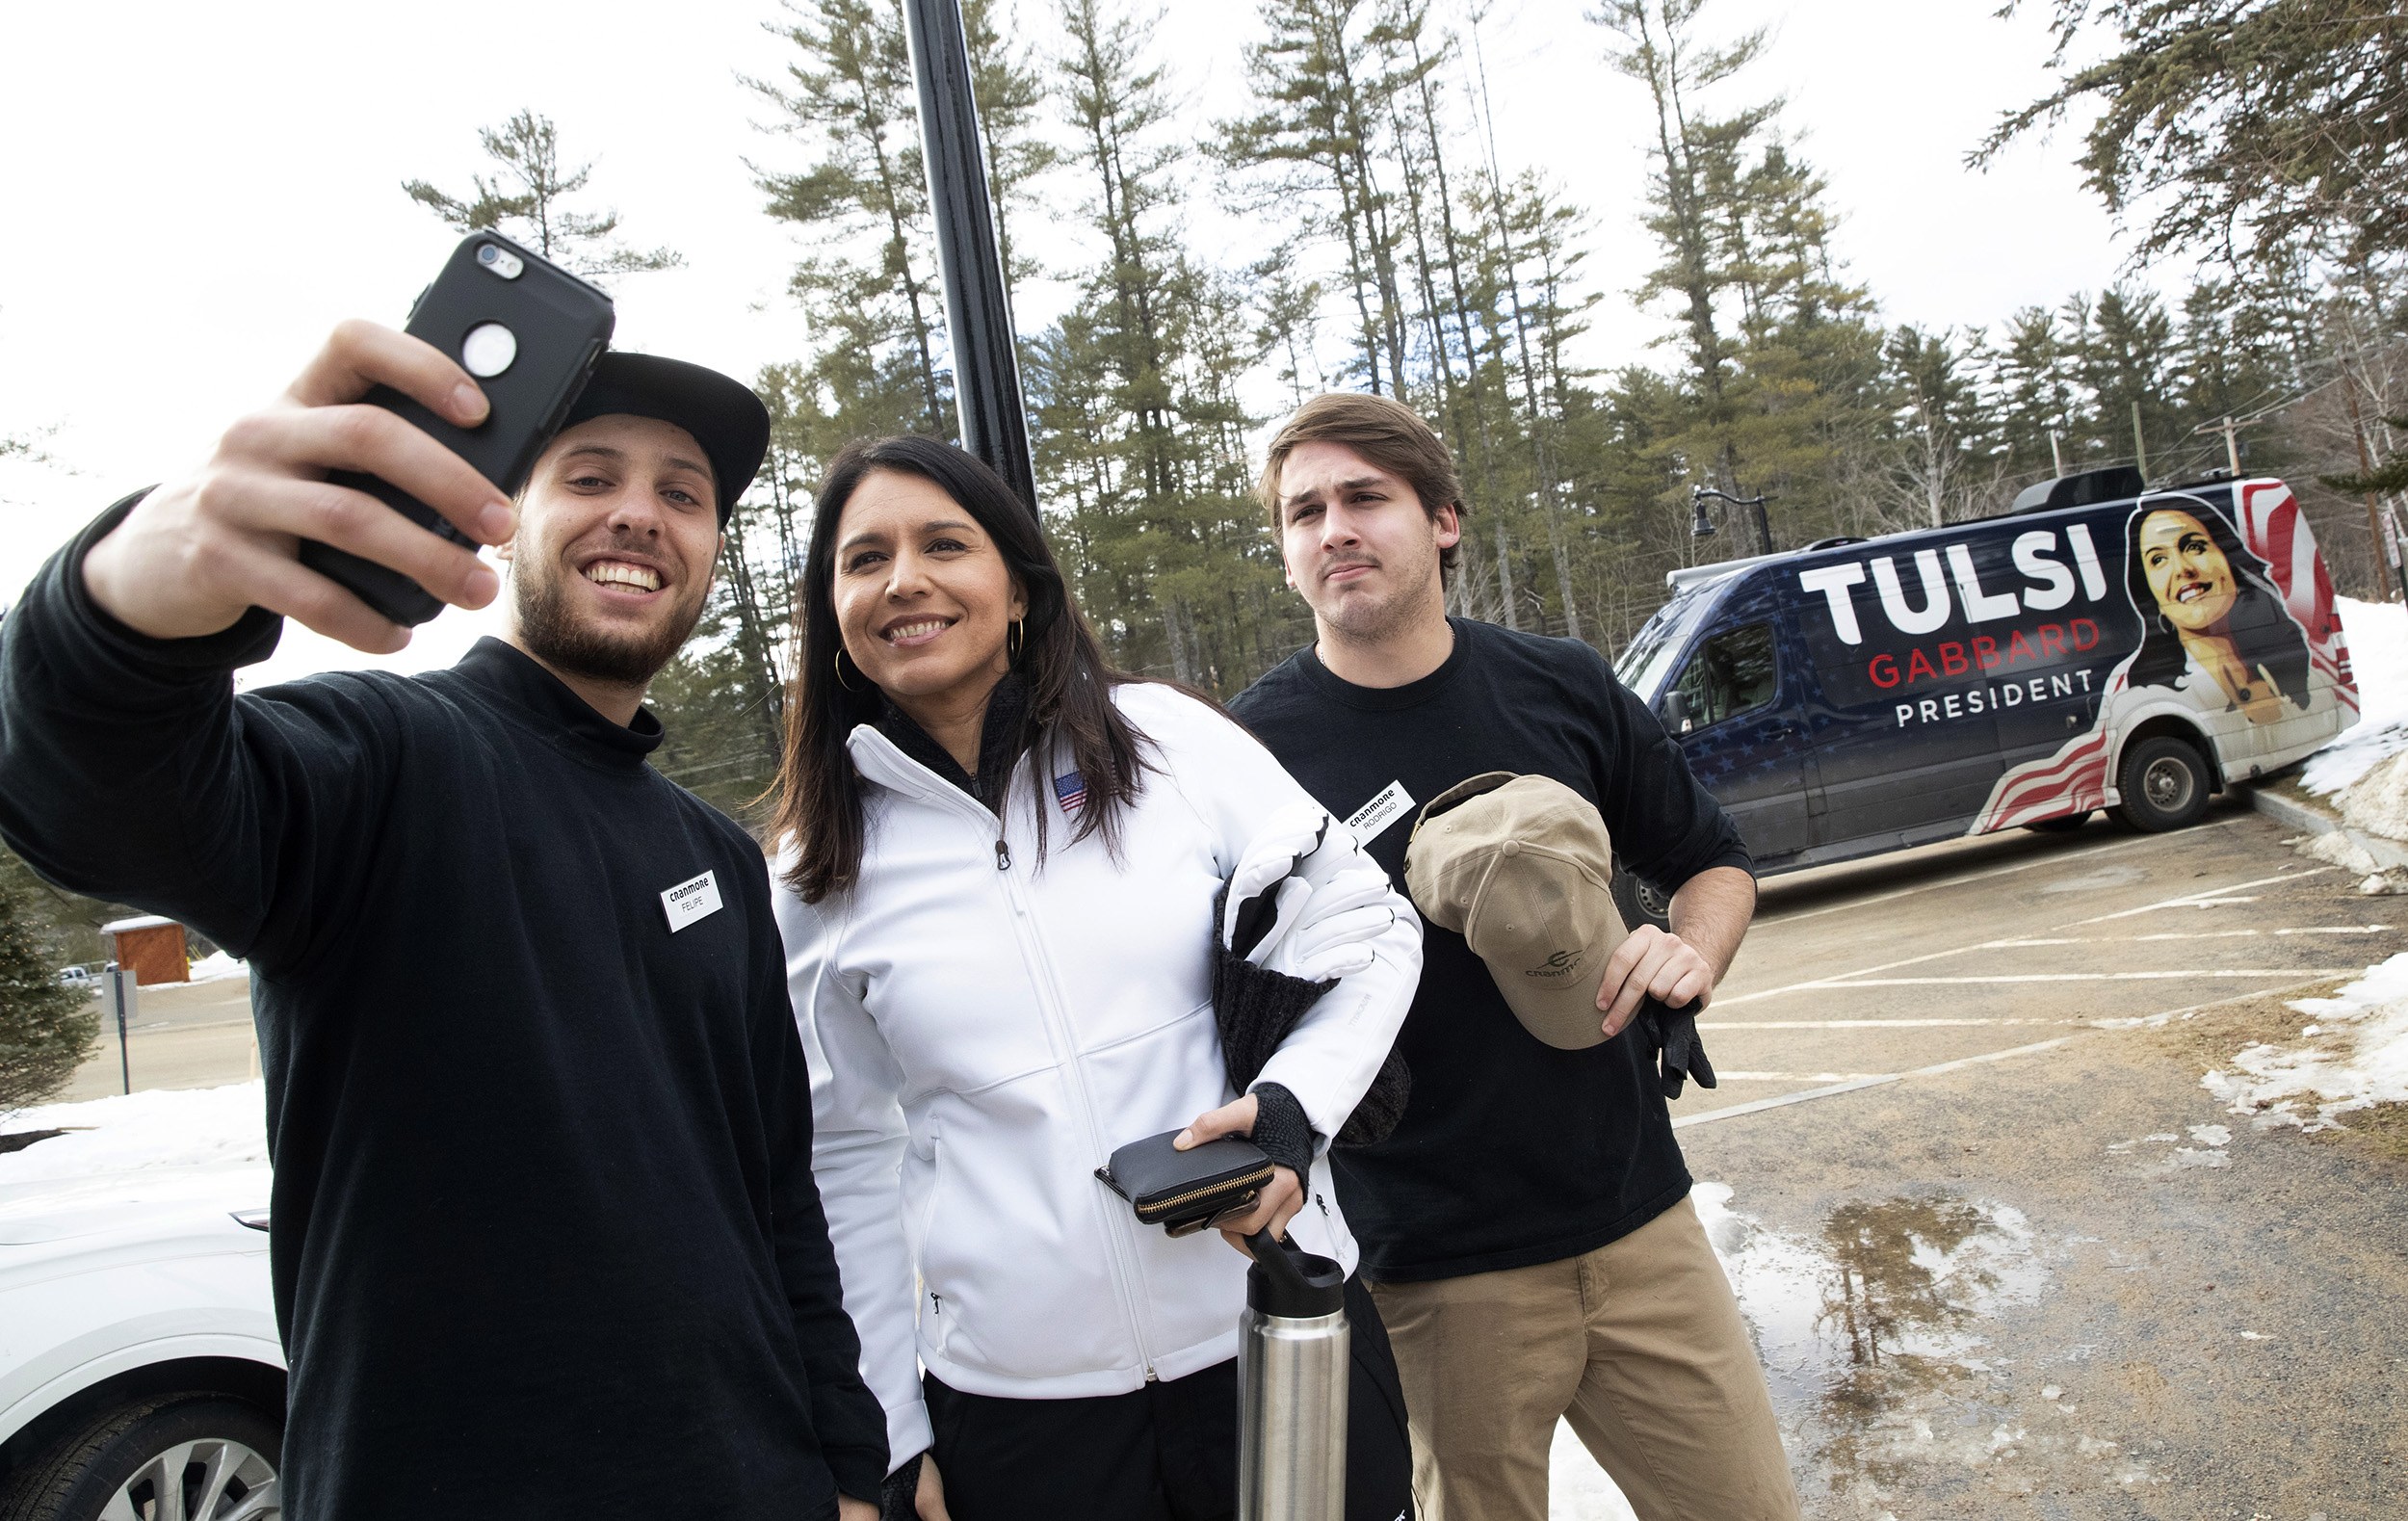 Rep. Tulsi Gabbard snowboards with New Hampshire supporters | Honolulu Star-Advertiser